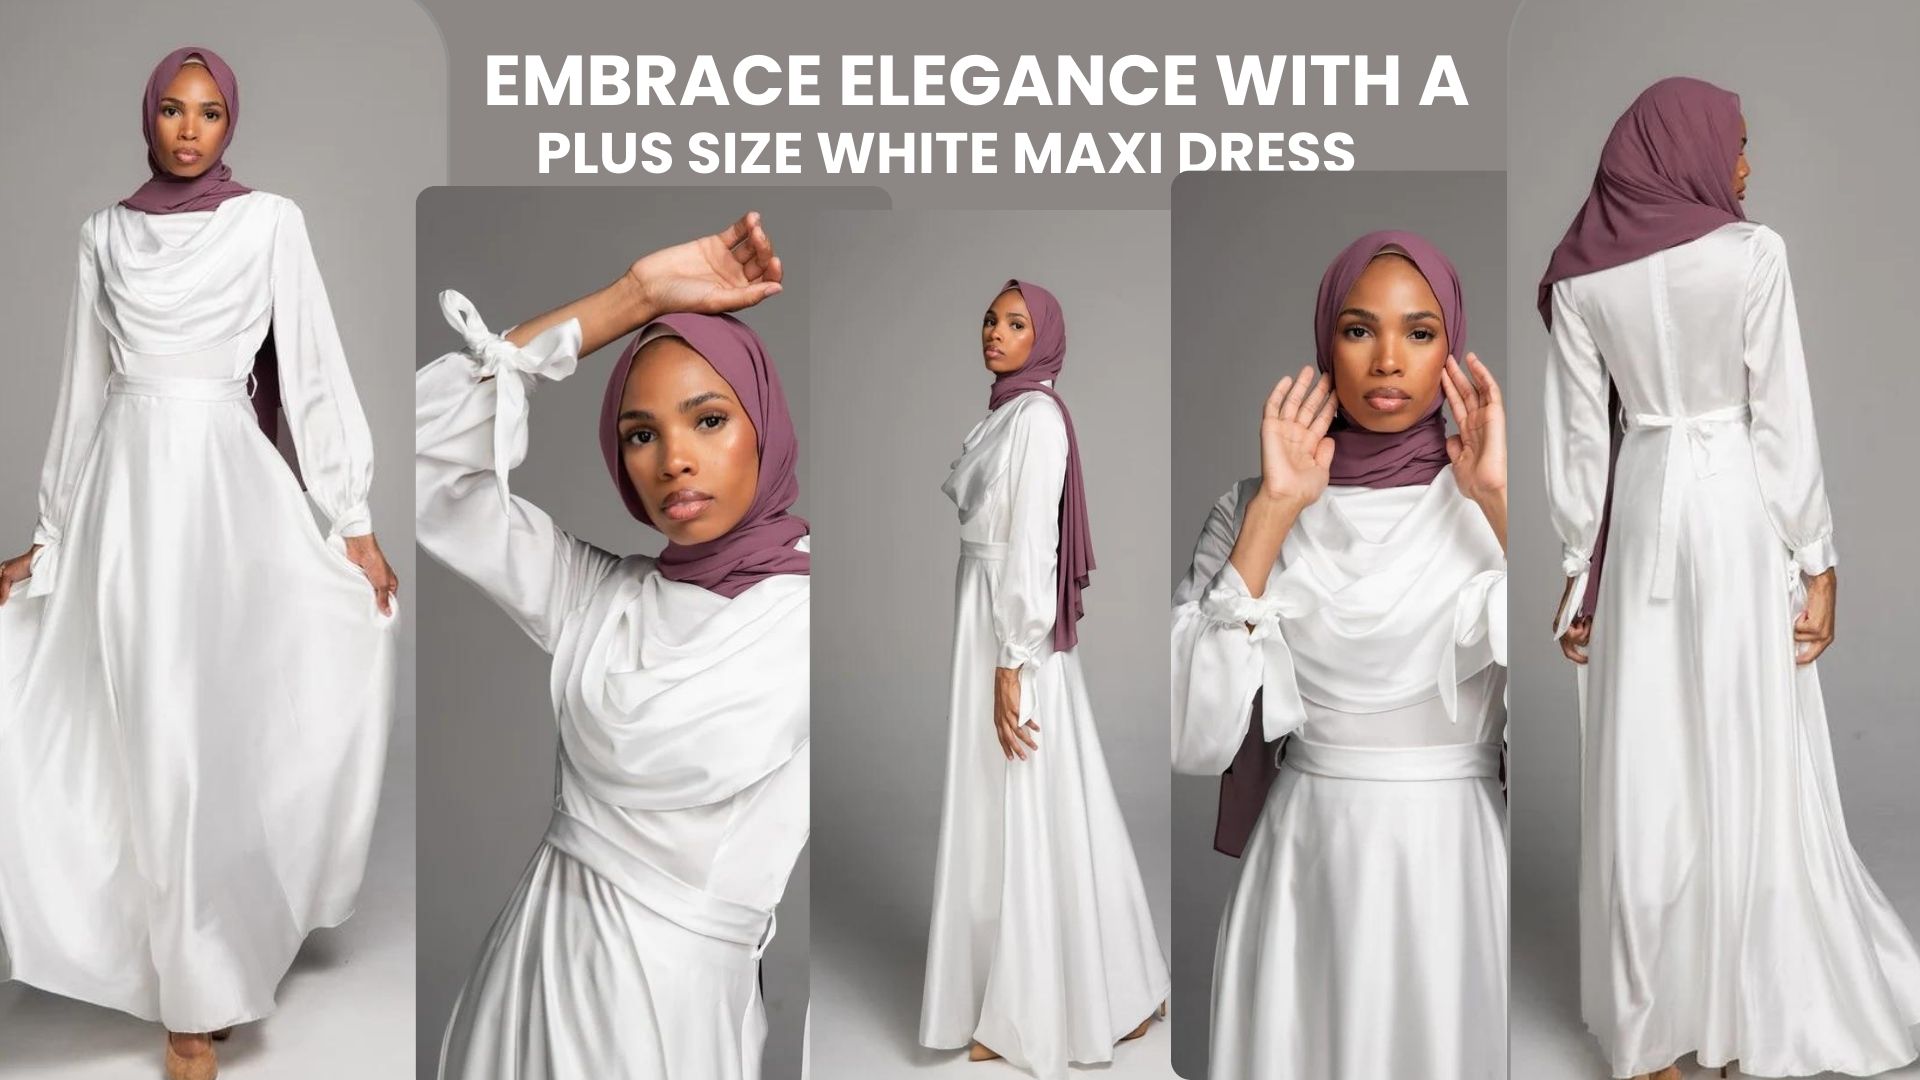 Embrace Elegance with a Plus Size White Maxi Dress